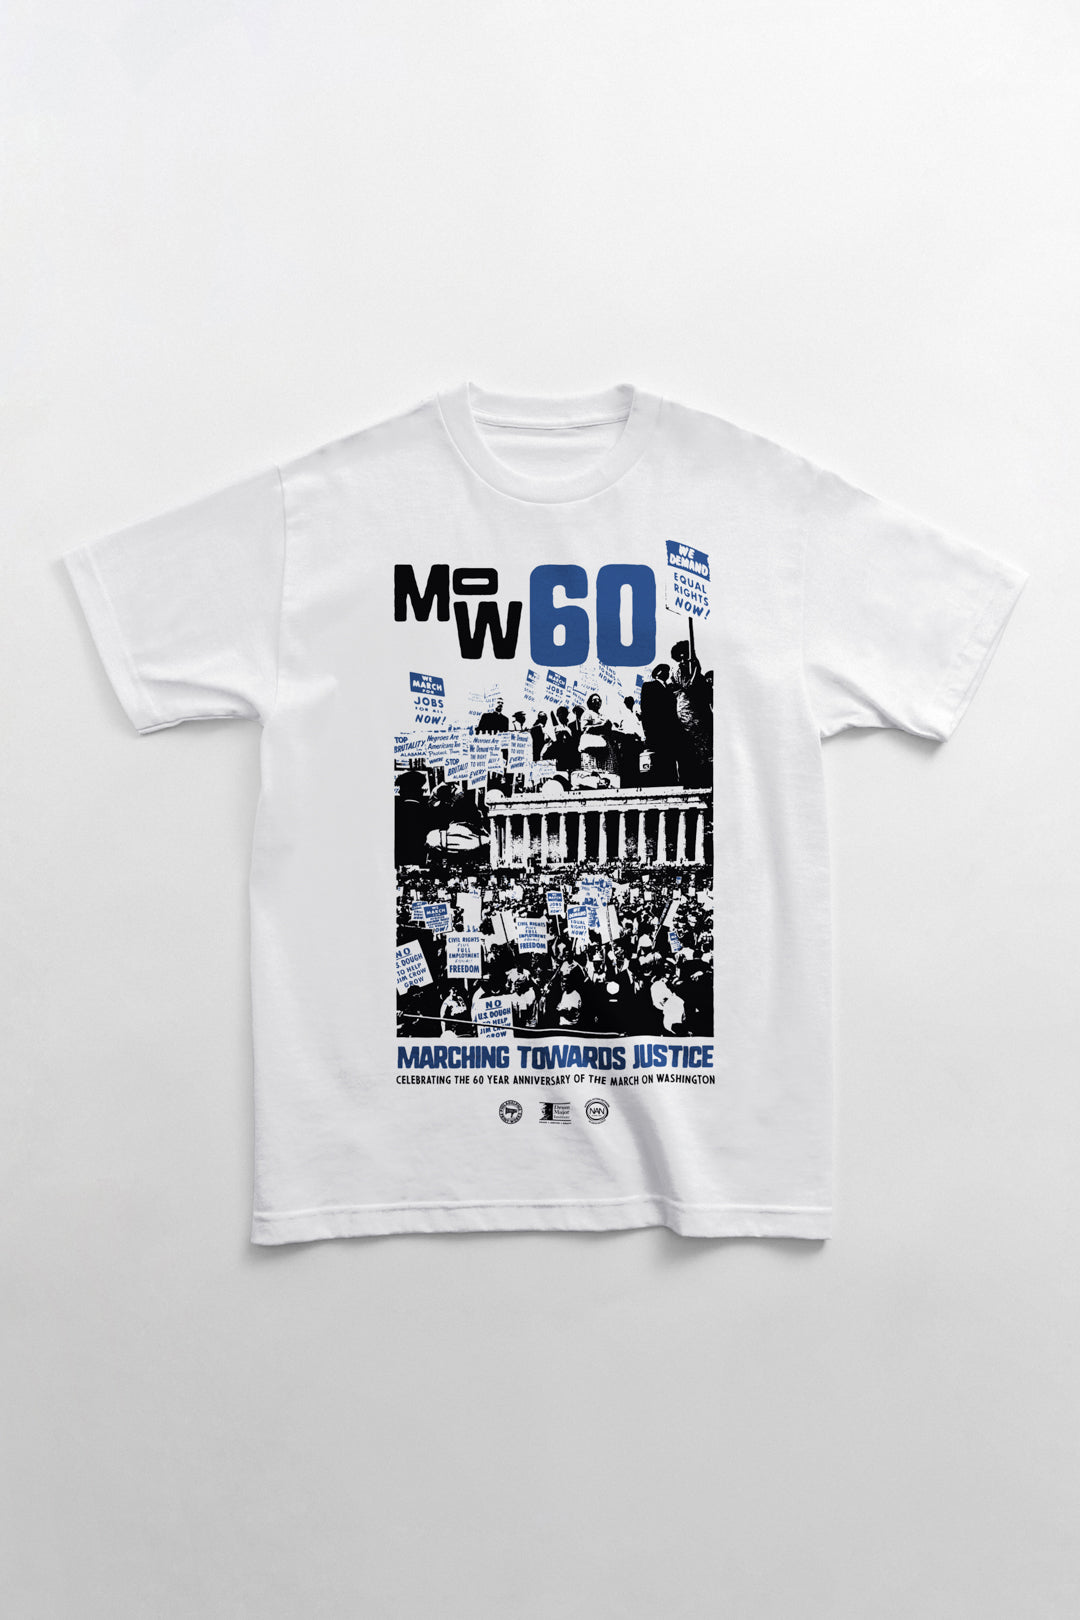 Image of t-shirt with that says "MOW60" with black and white images of the original March on Washington protestors.